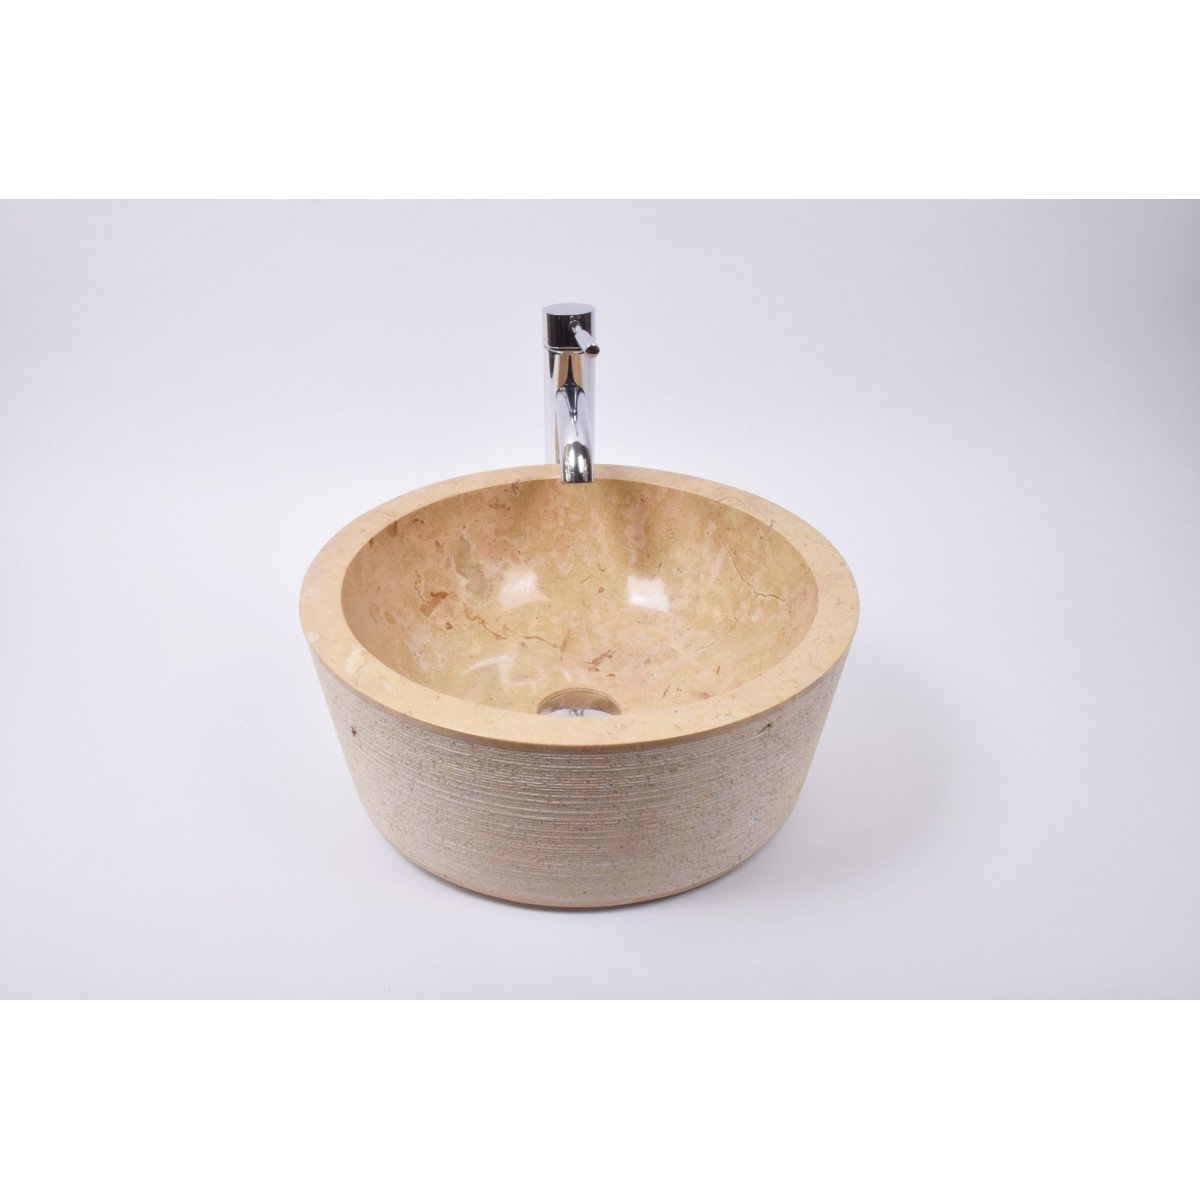 LYC-G RED RE4 40 cm wash basin overtop INDUSTONE